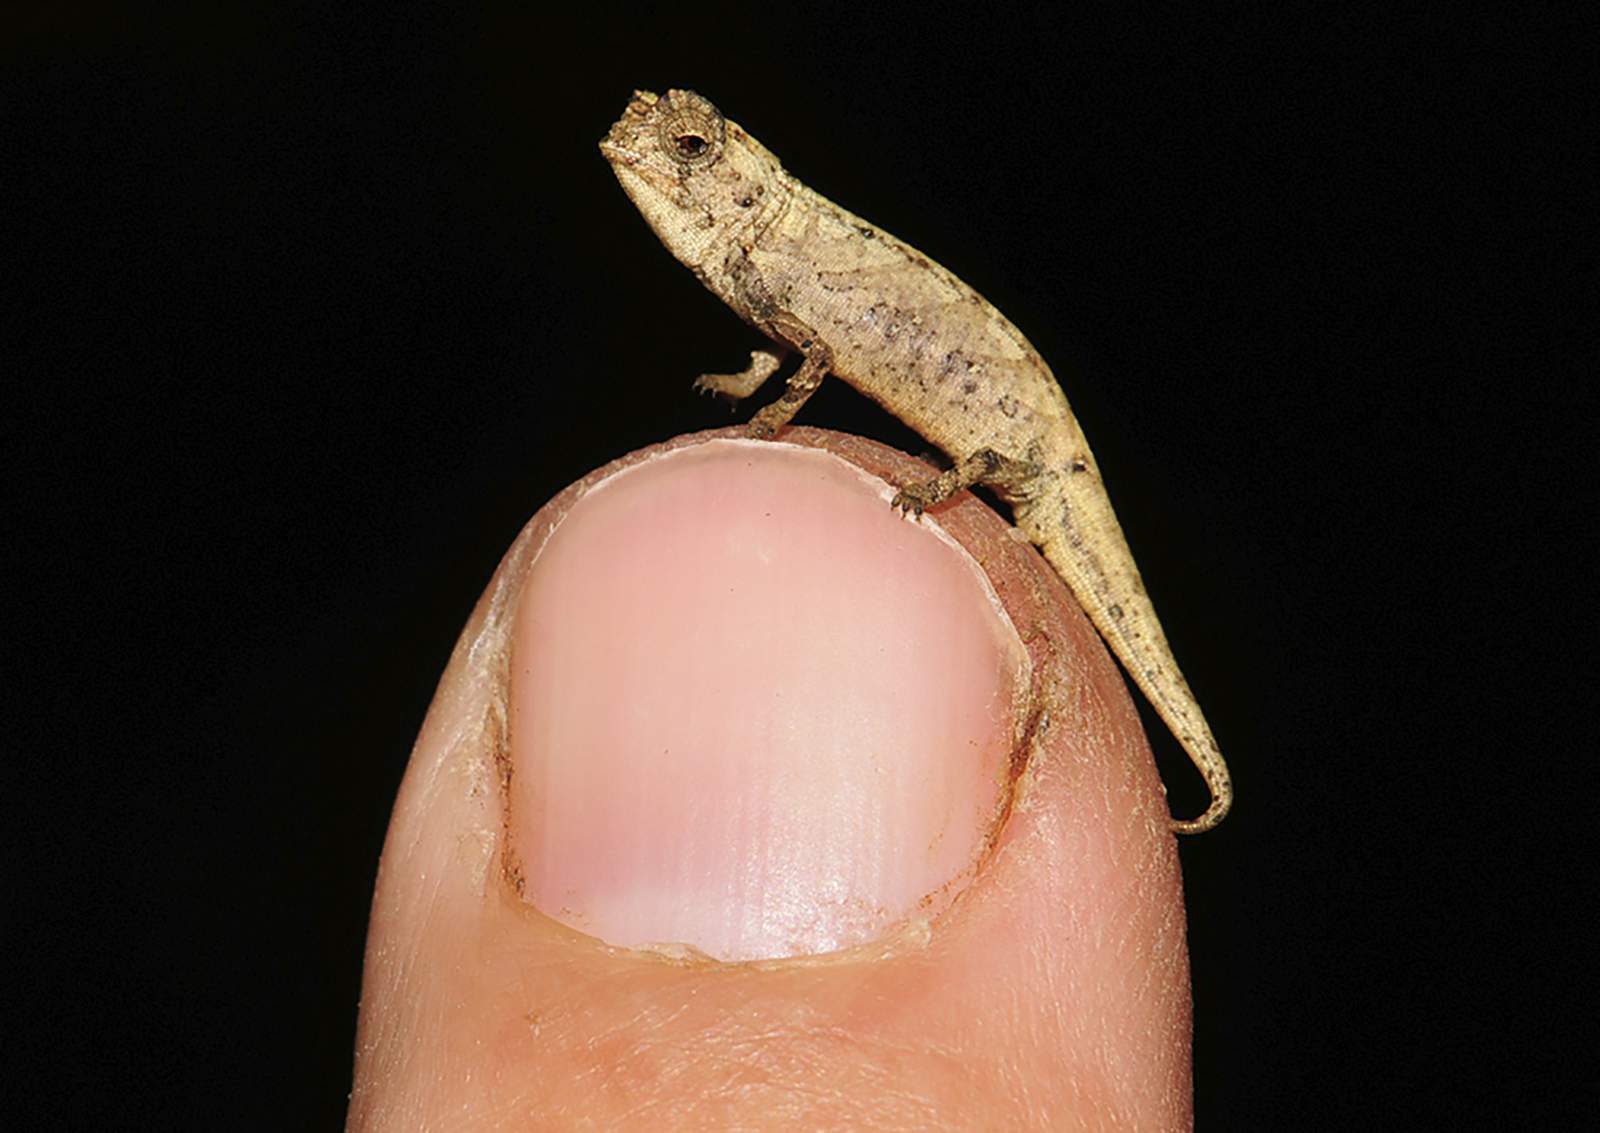 Tiny chameleon a contender for title of smallest reptile